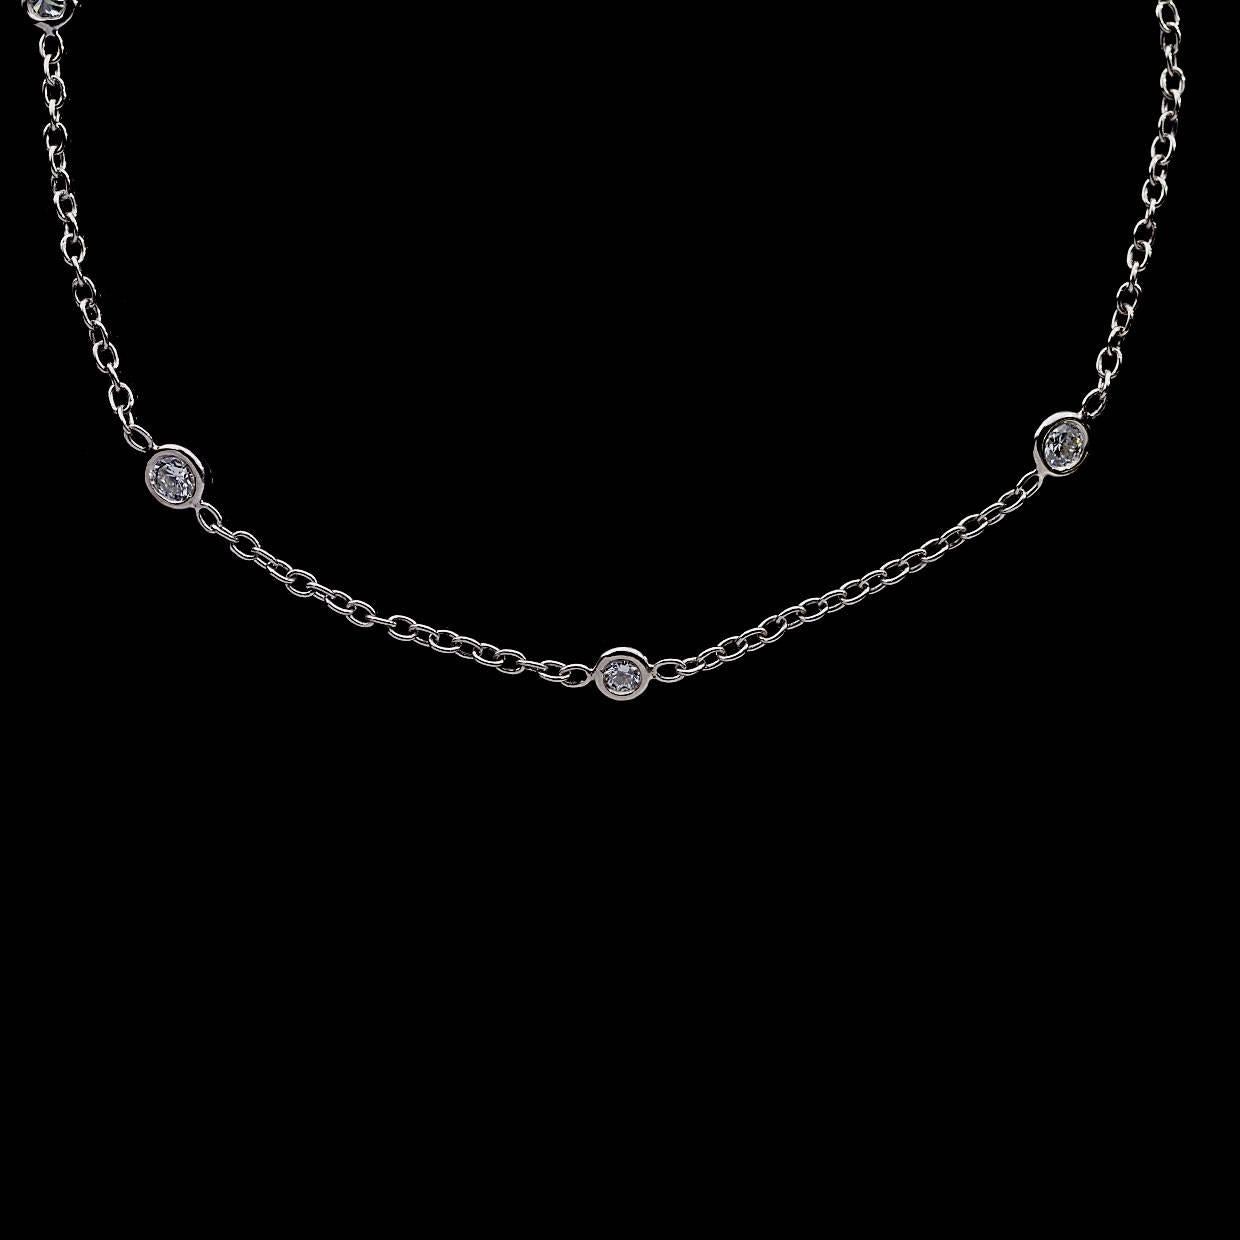 This gorgeous necklace is from the designer Penny Preville, who's been a legend in the jewelry business for over 40 years. Designing classic luxuries from intricate bridal to elegant everyday pieces, Penny captures the essence of what a woman wants